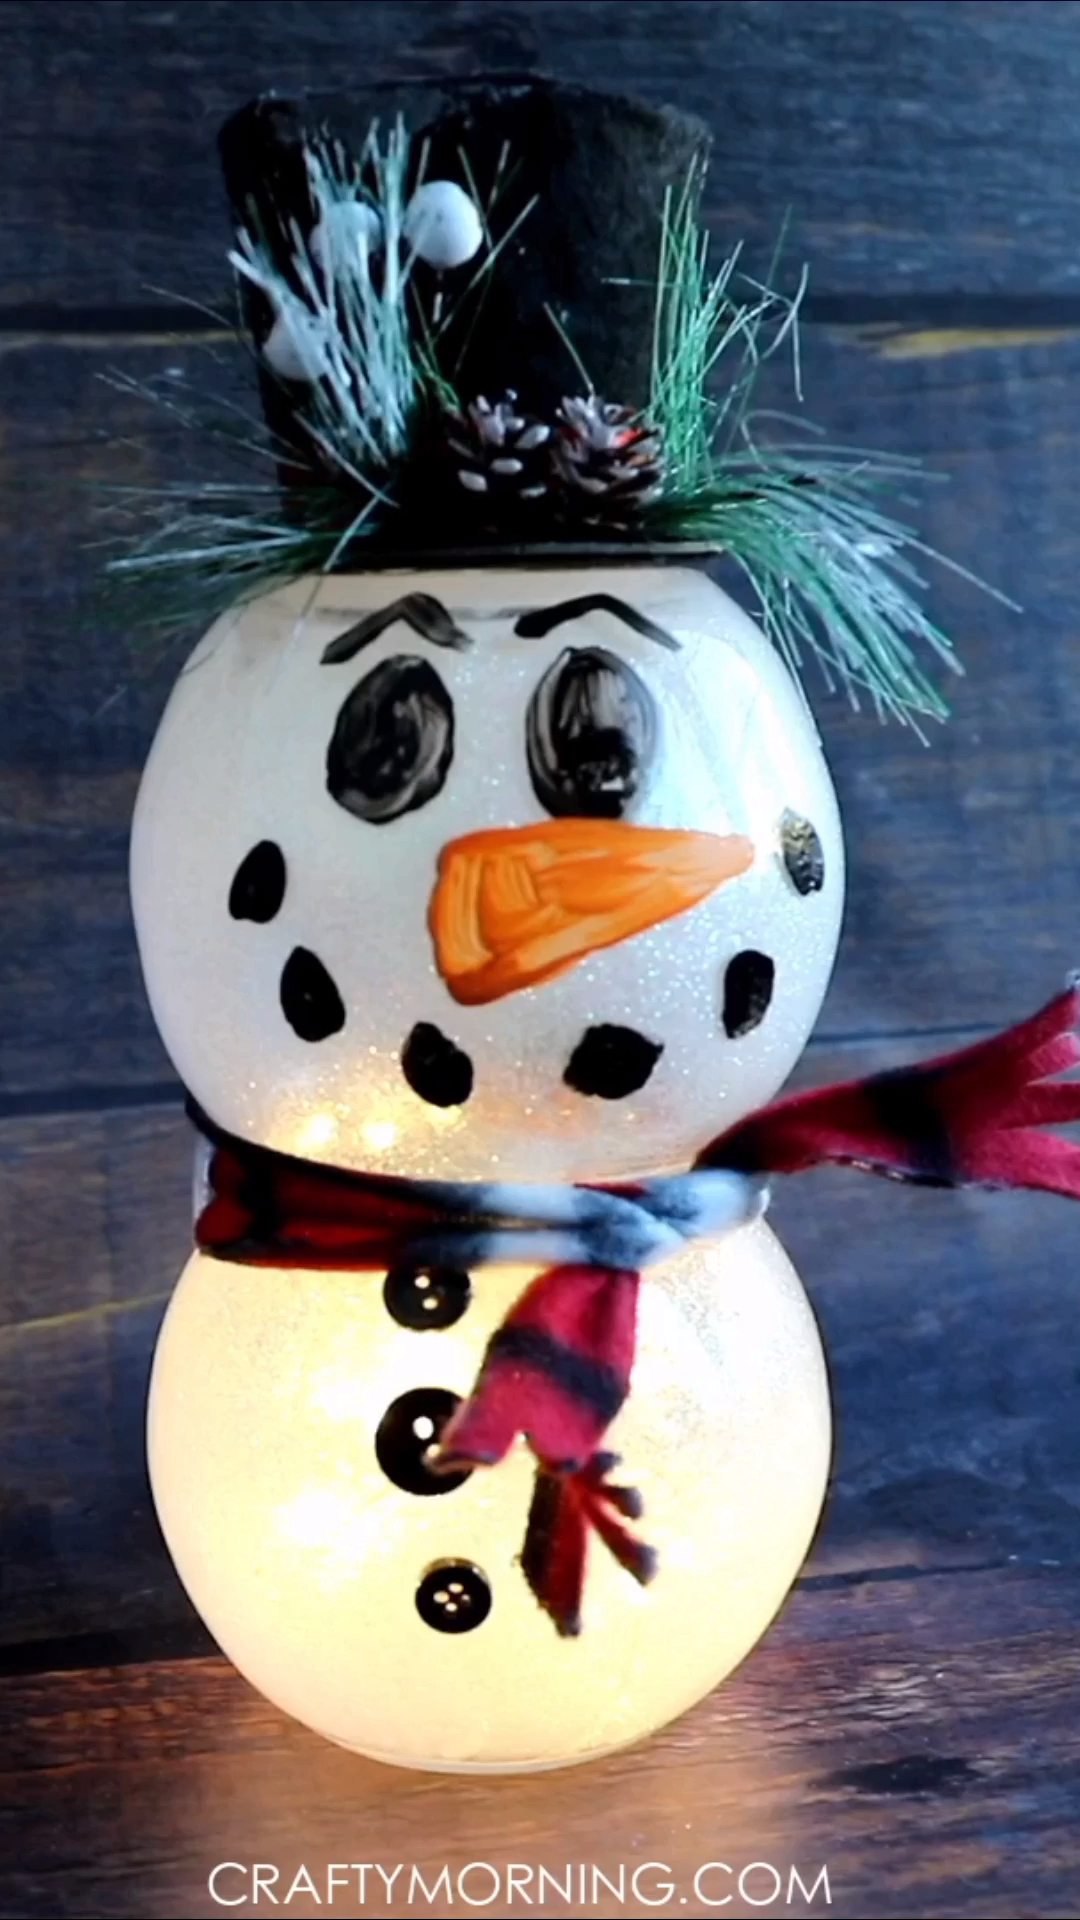 Lighted Fish Bowl Snowman -   18 diy projects Crafts ideas